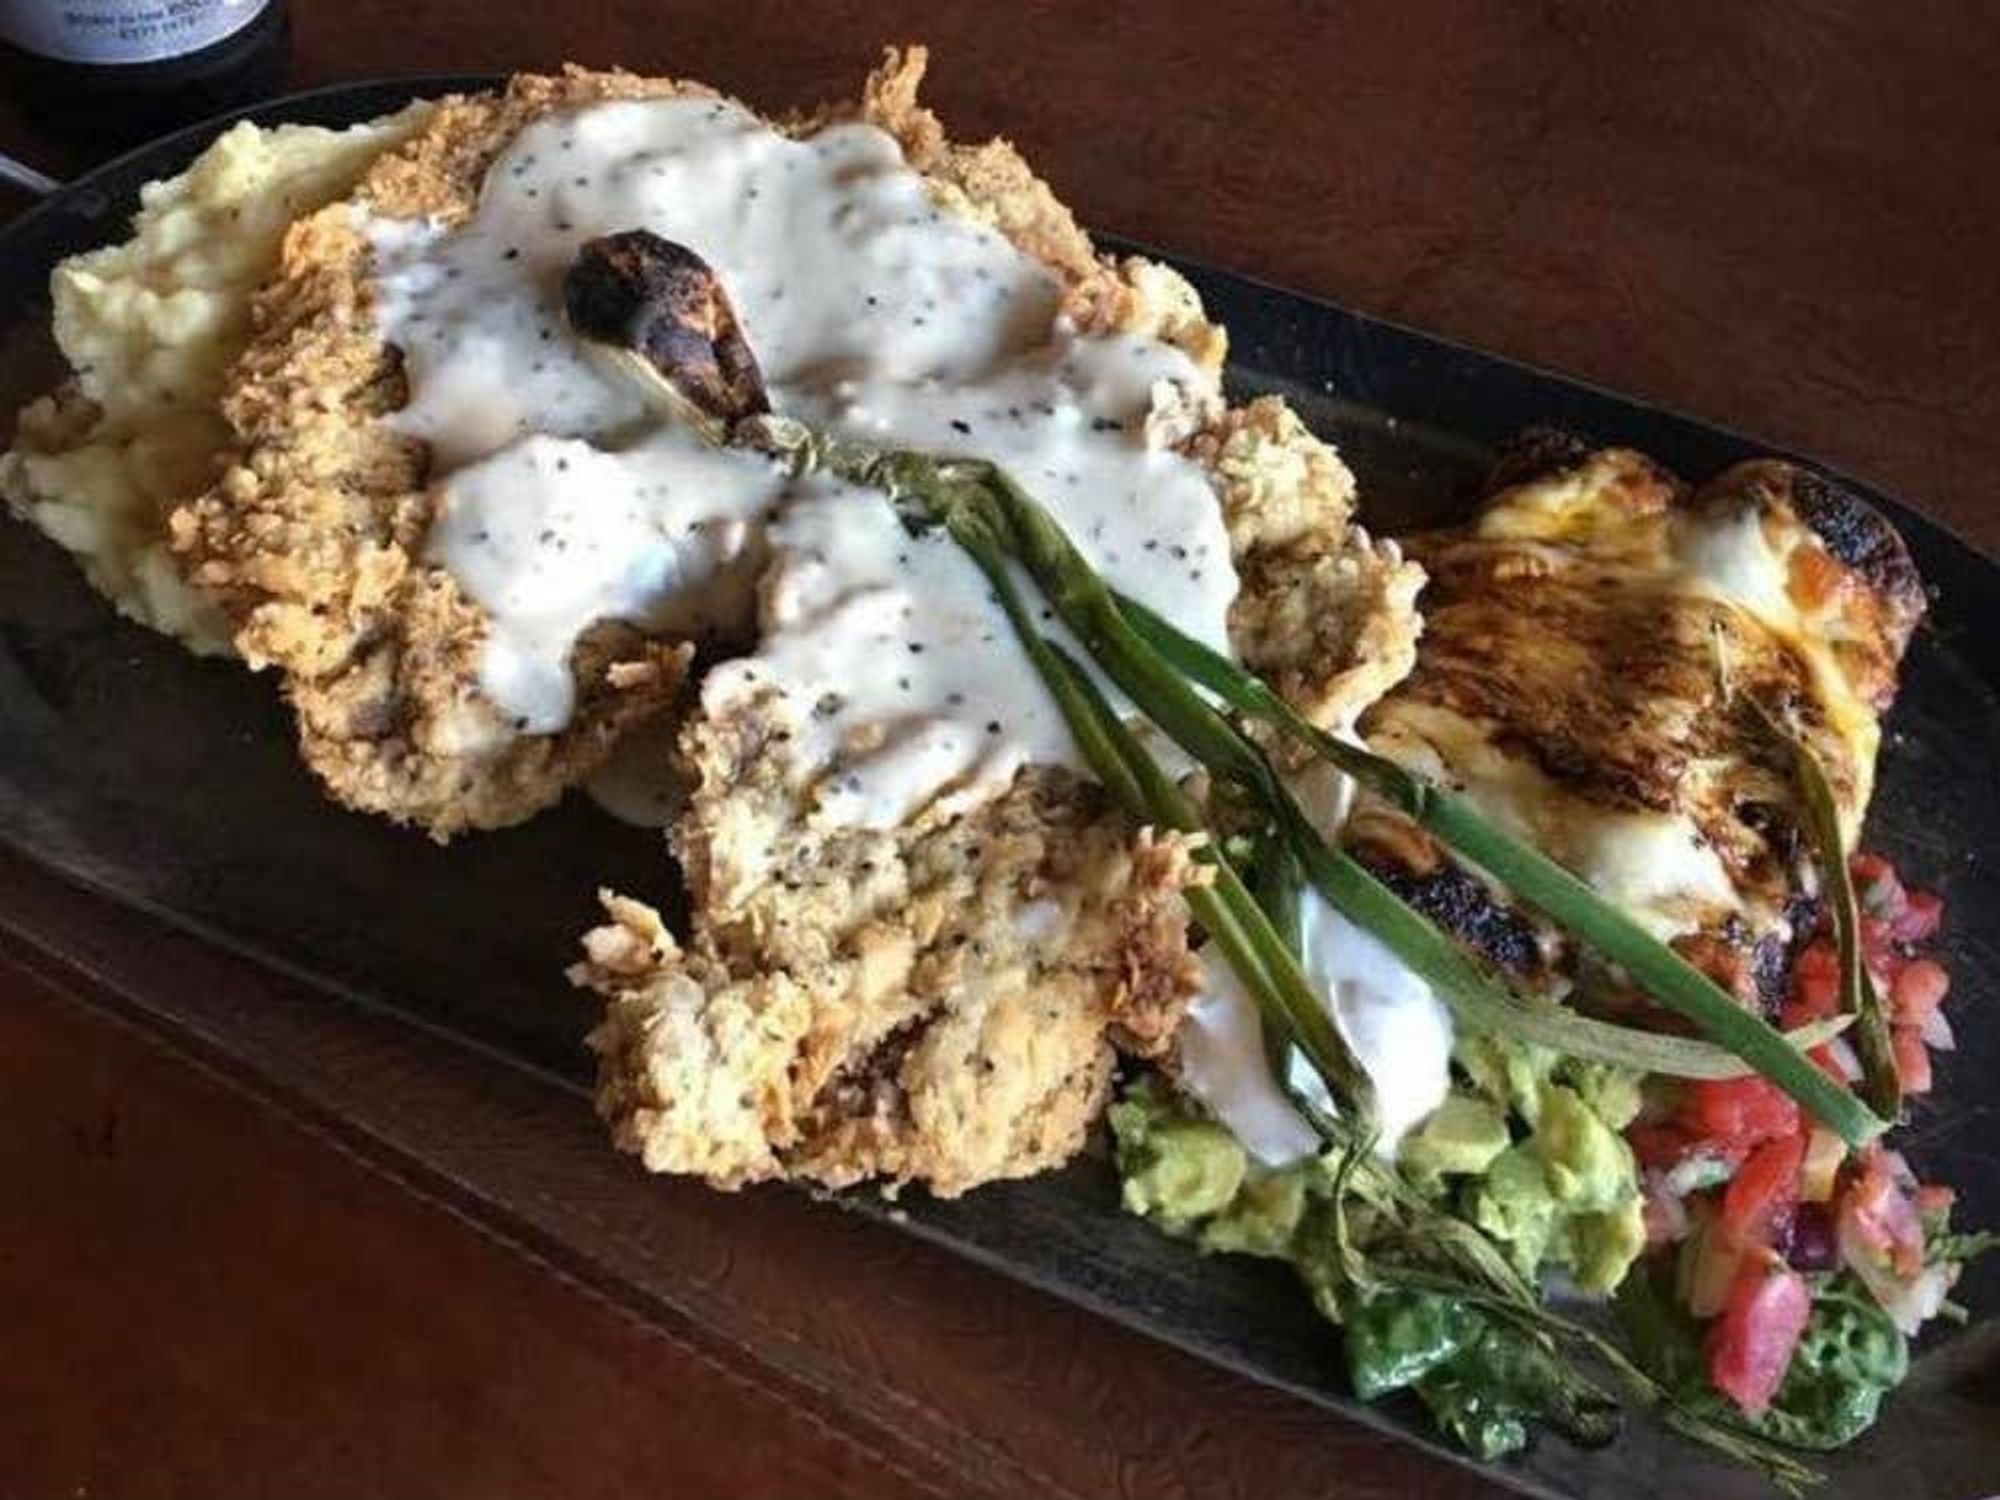 Chicken fried steak at Horseshoe Hill Cafe